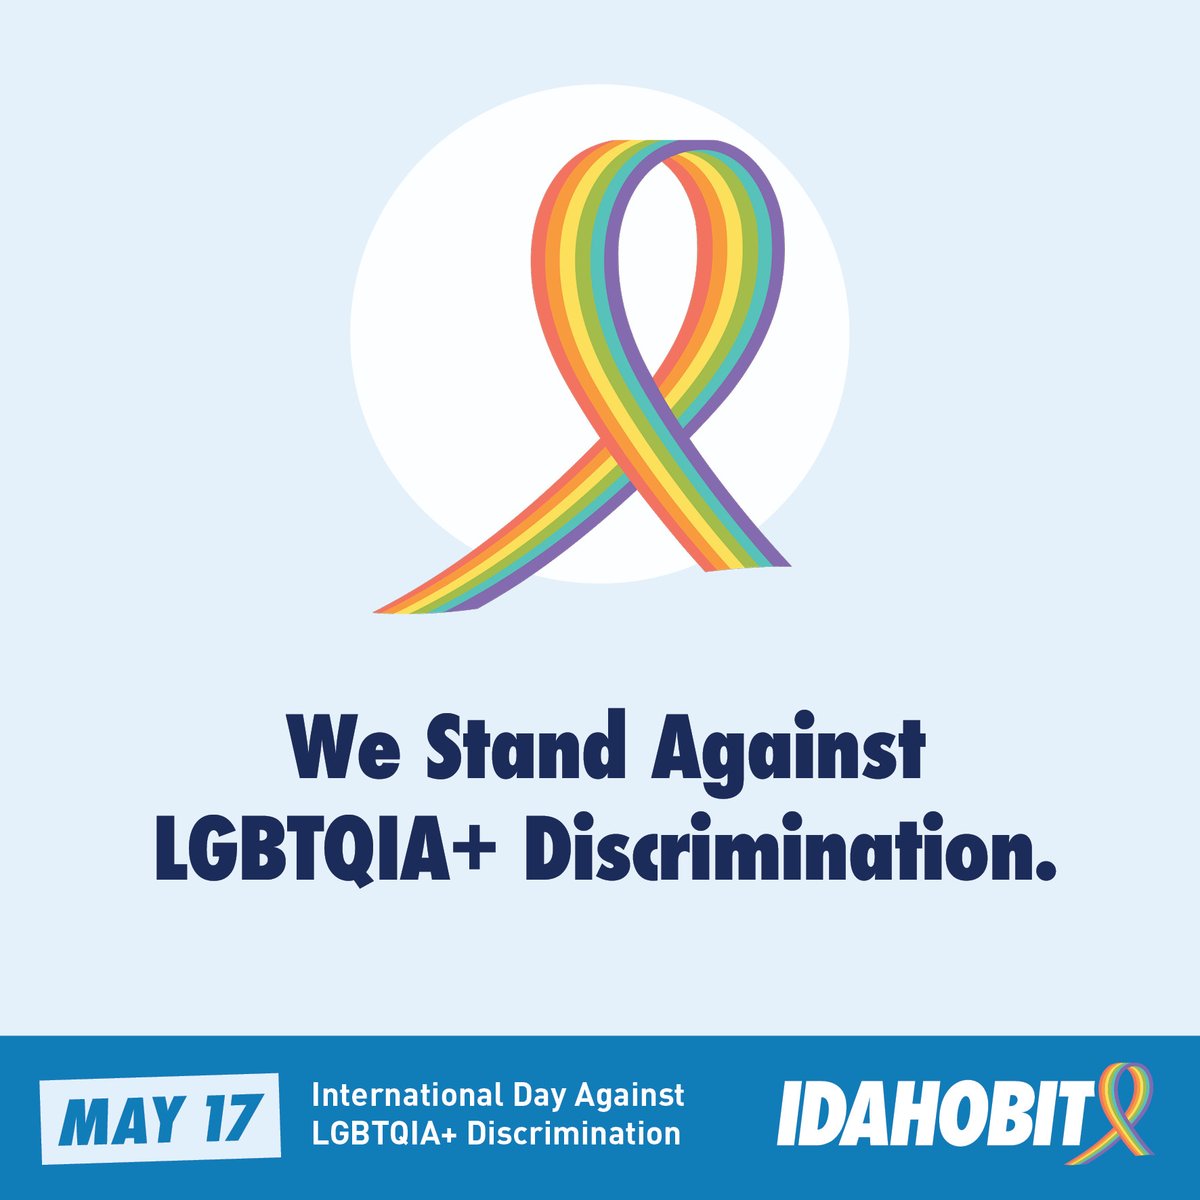 #IDAHOBIT2024 - Let's make sure everyone gets the healthcare they deserve 🌈

CHF is proud to work with our partners to reduce stigma and discrimination so the LGBTIQA+ community feel safe in accessing healthcare when and where they need it. 

#InclusiveHealthcare